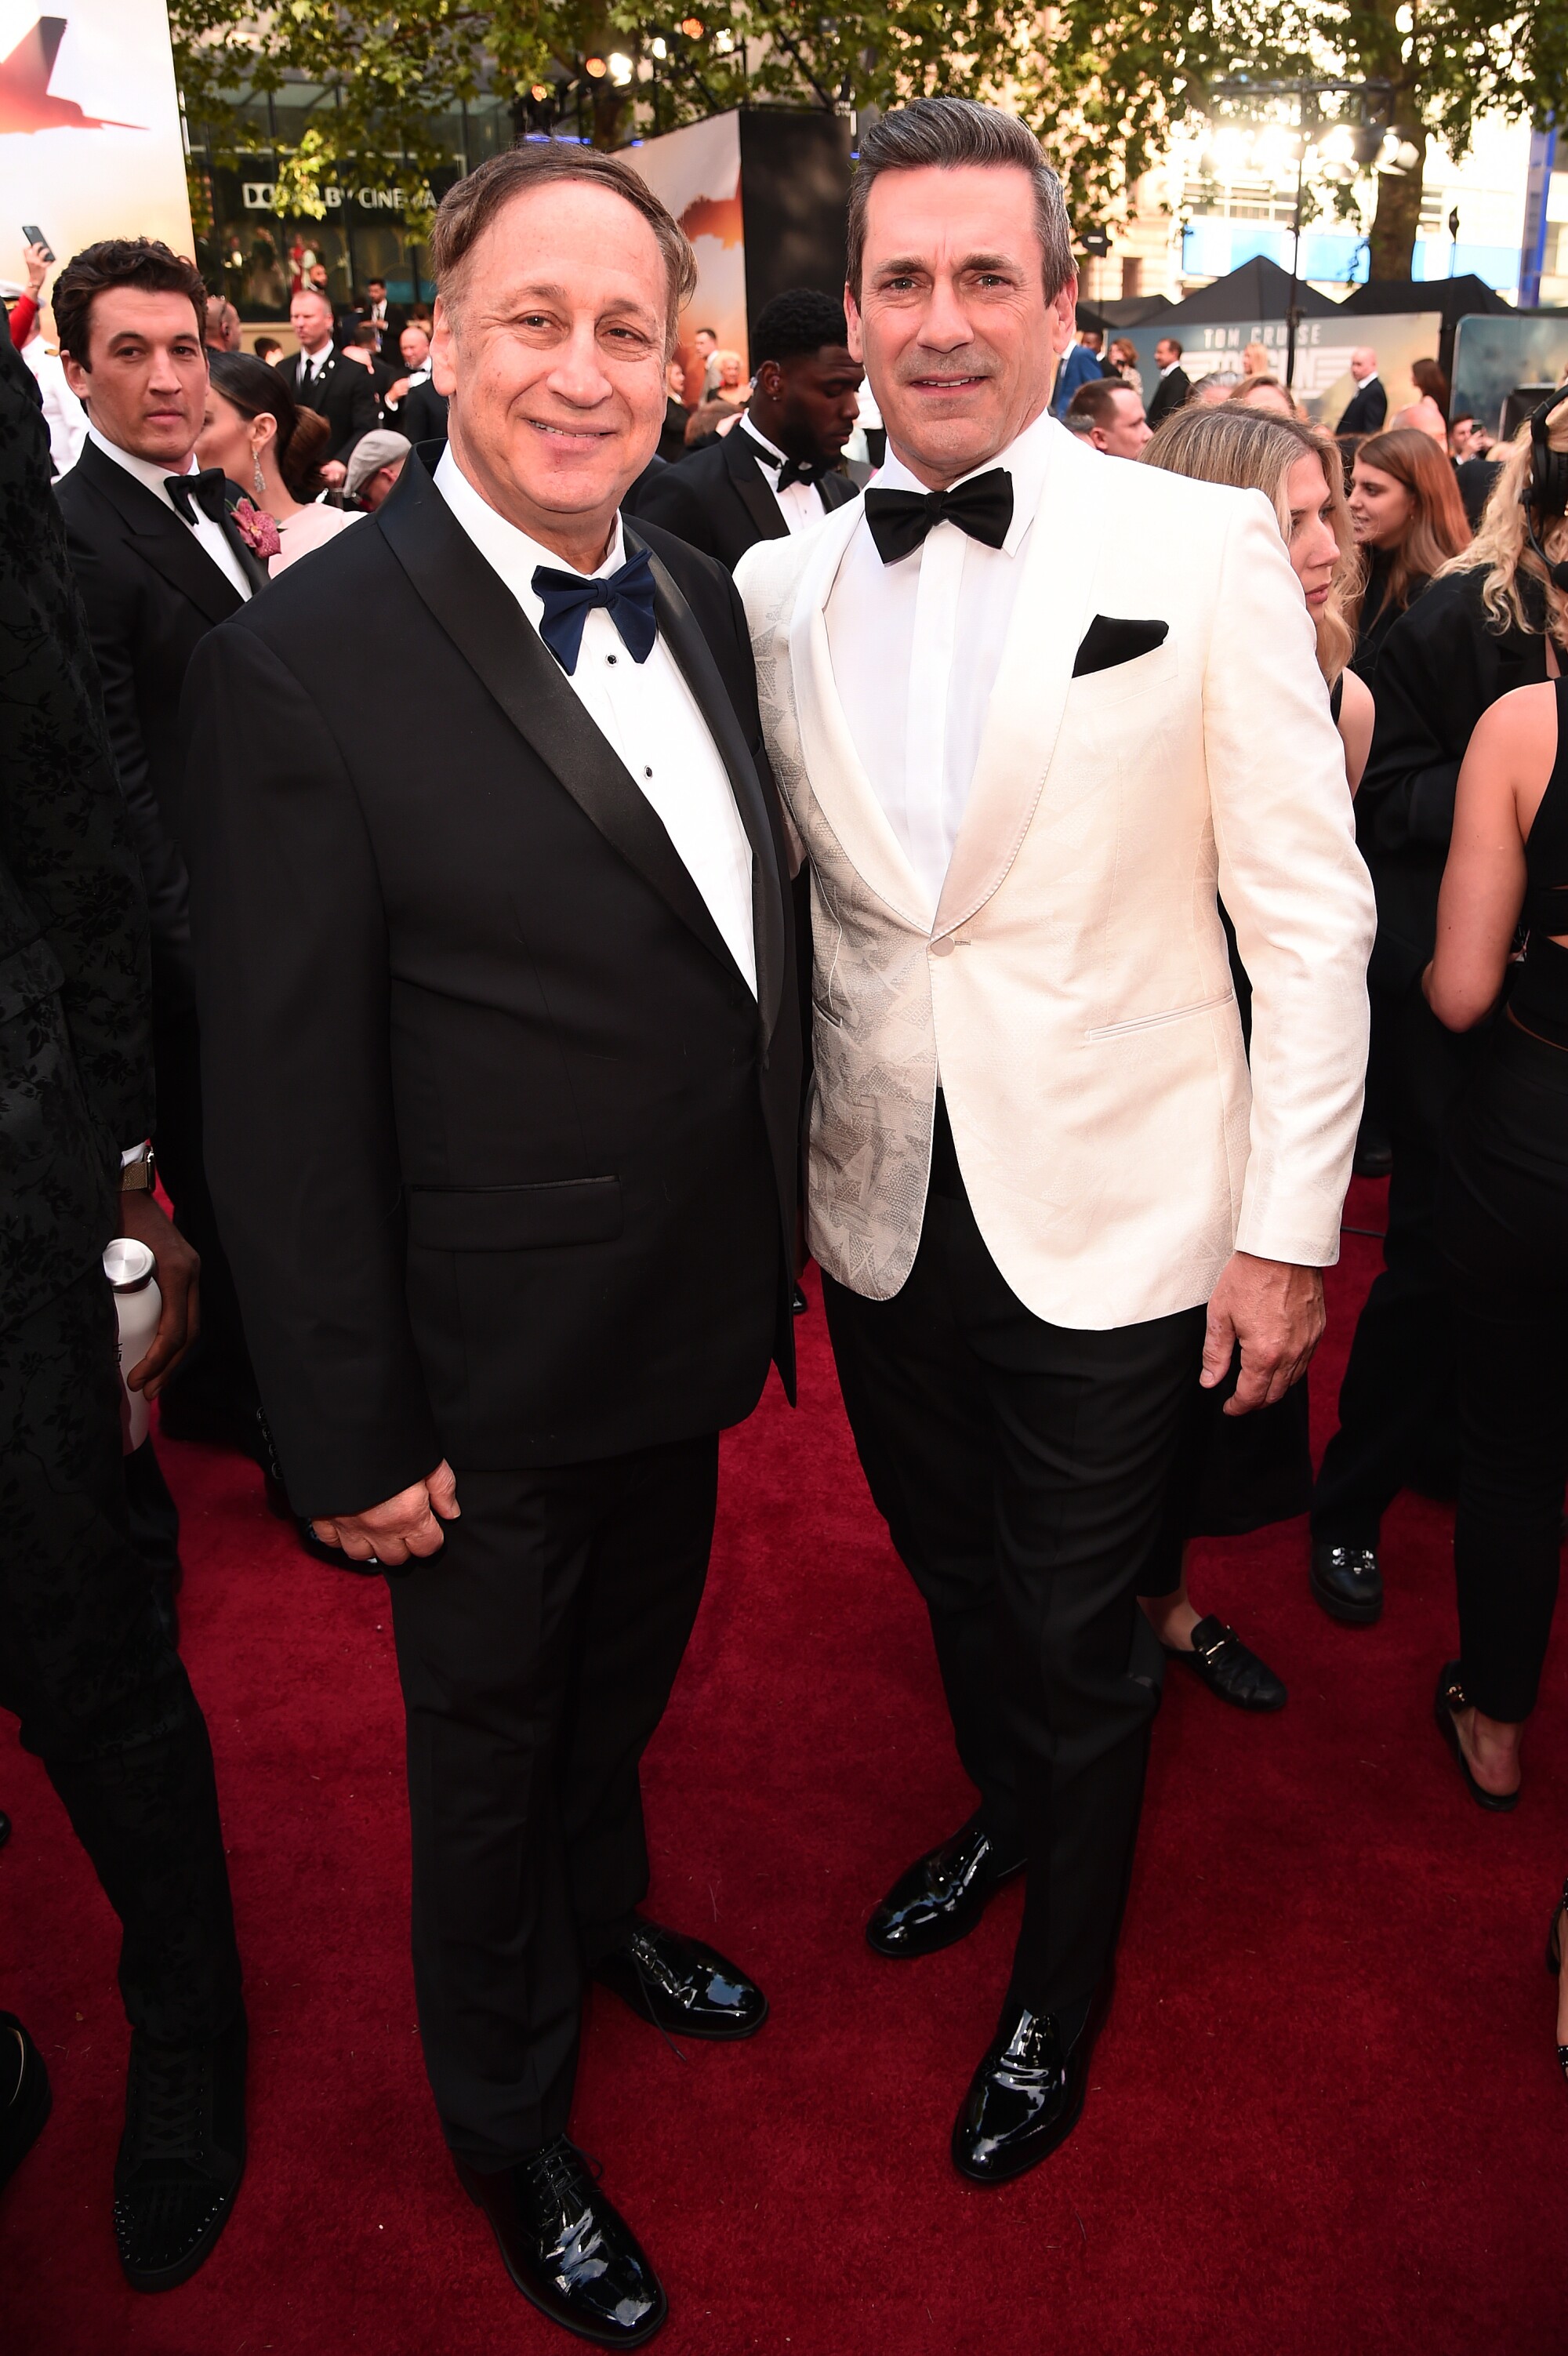 Two men in tuxedoes on the red carpet